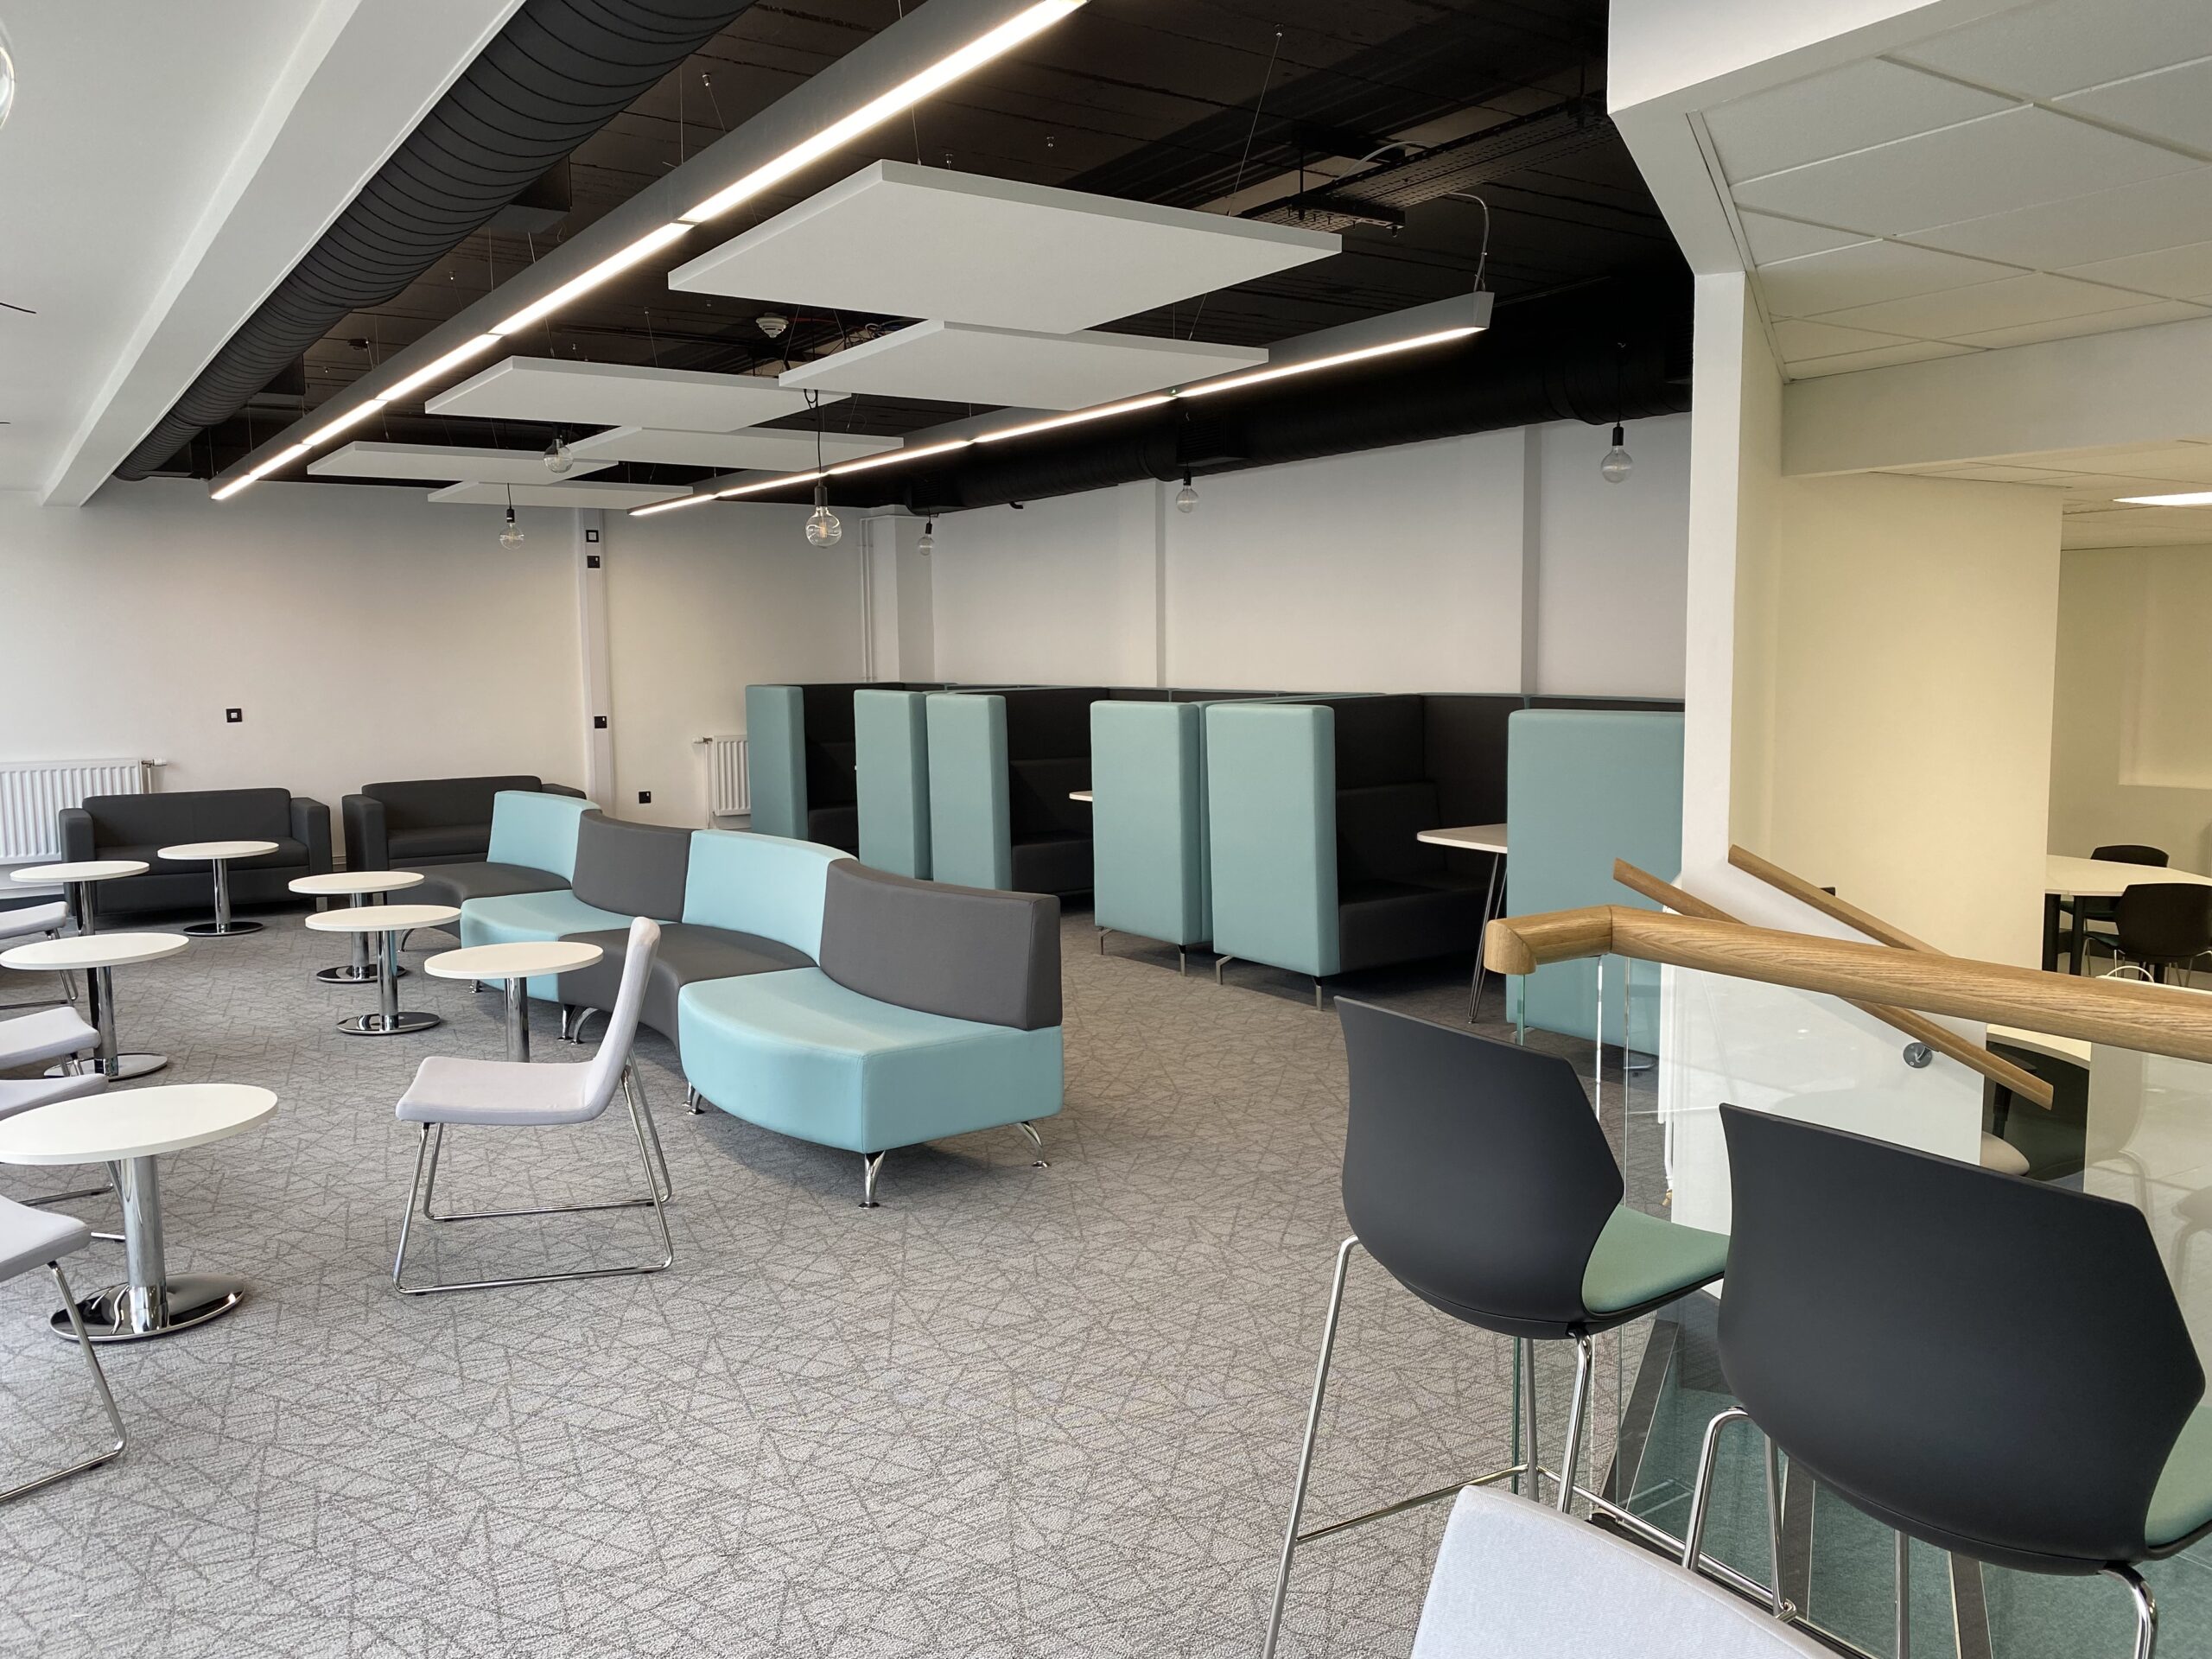 Building refurbishment for City College Plymouth Pinpoint site